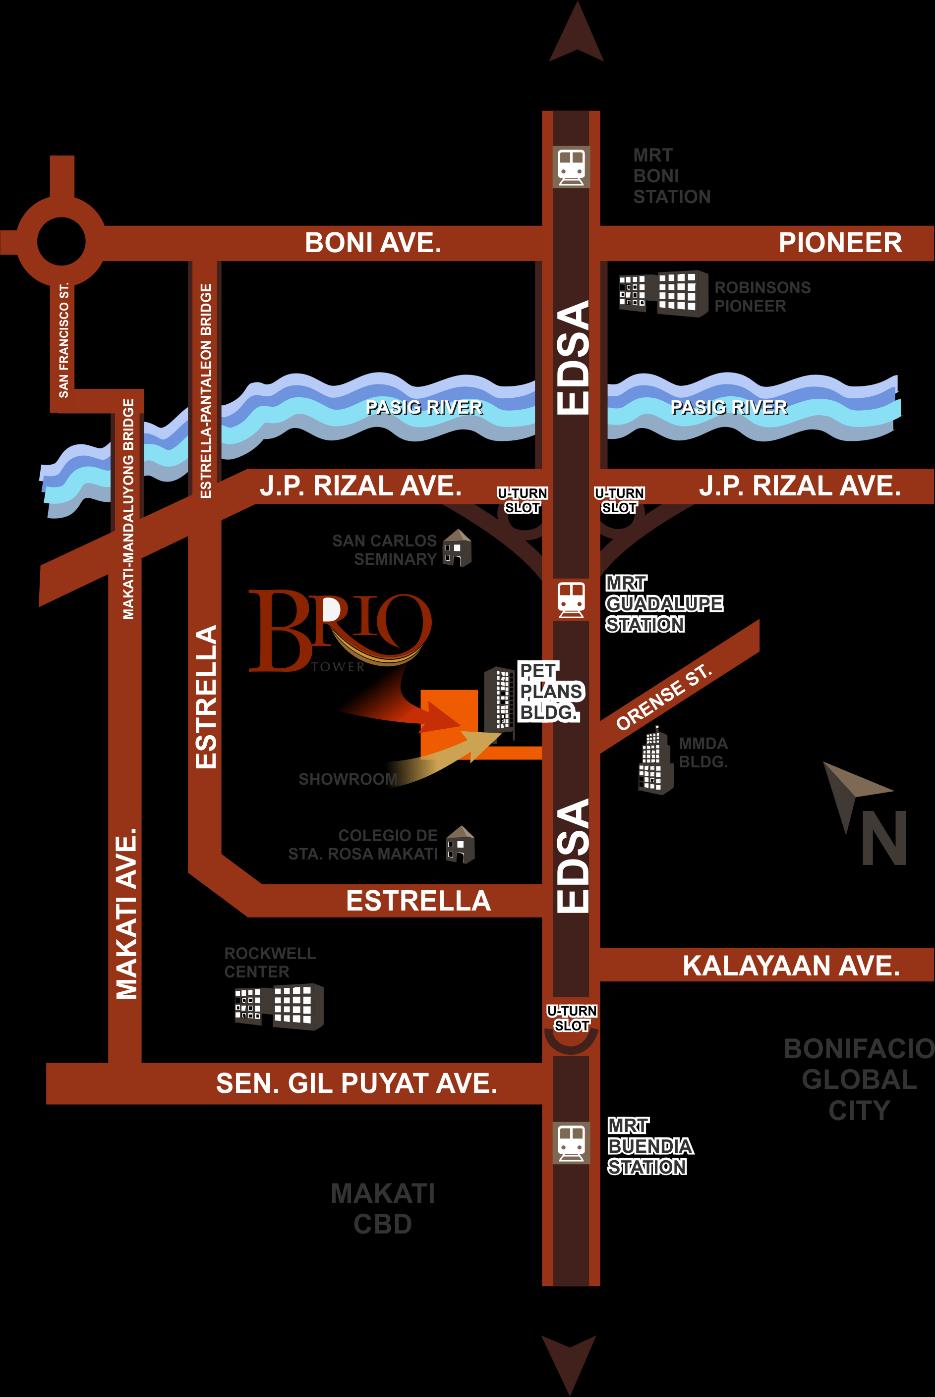 LOCATION Address: EDSA, Guadalupe Viejo, Makati City How to get there: FROM EDSA NORTHBOUND Approaching Southbound, just turn right after PET PLANS Building FROM EDSA NORTHBOUND Approaching